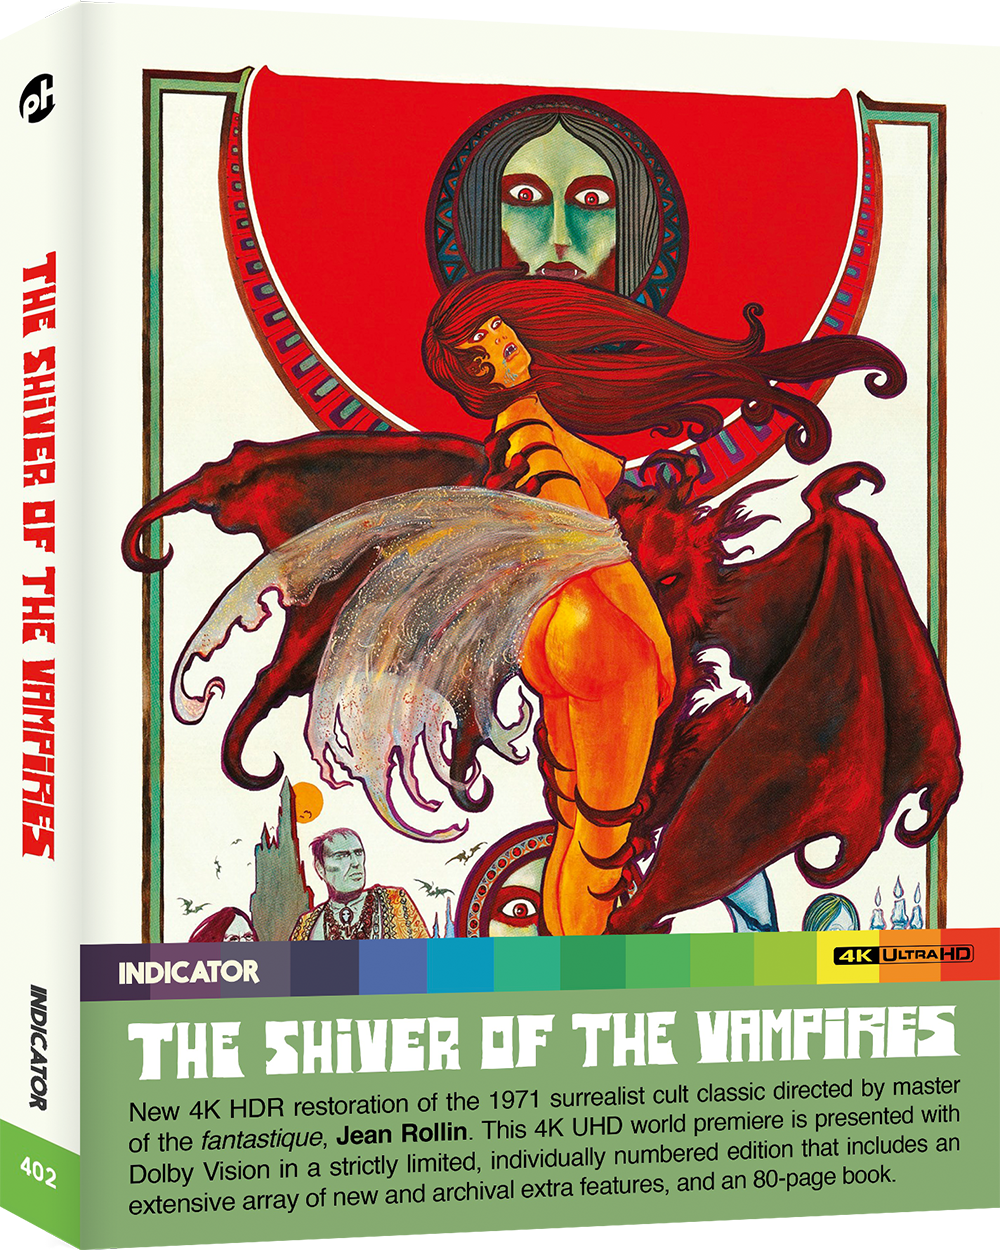 THE SHIVER OF THE VAMPIRES - 4K UHD LE